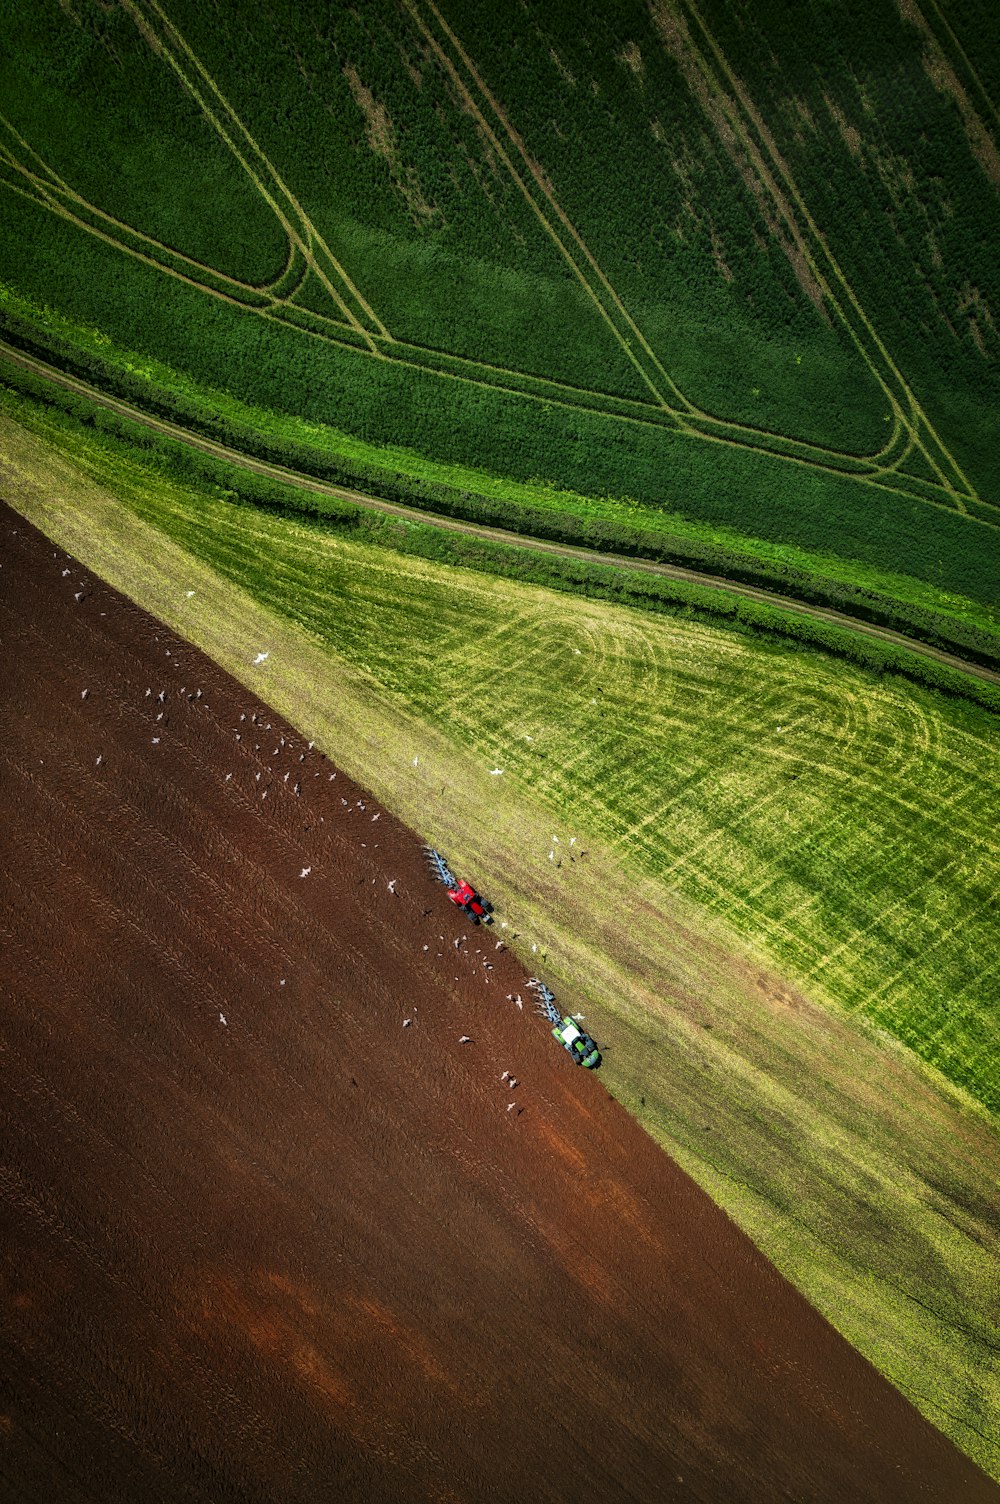 a tractor plowing a field of grass